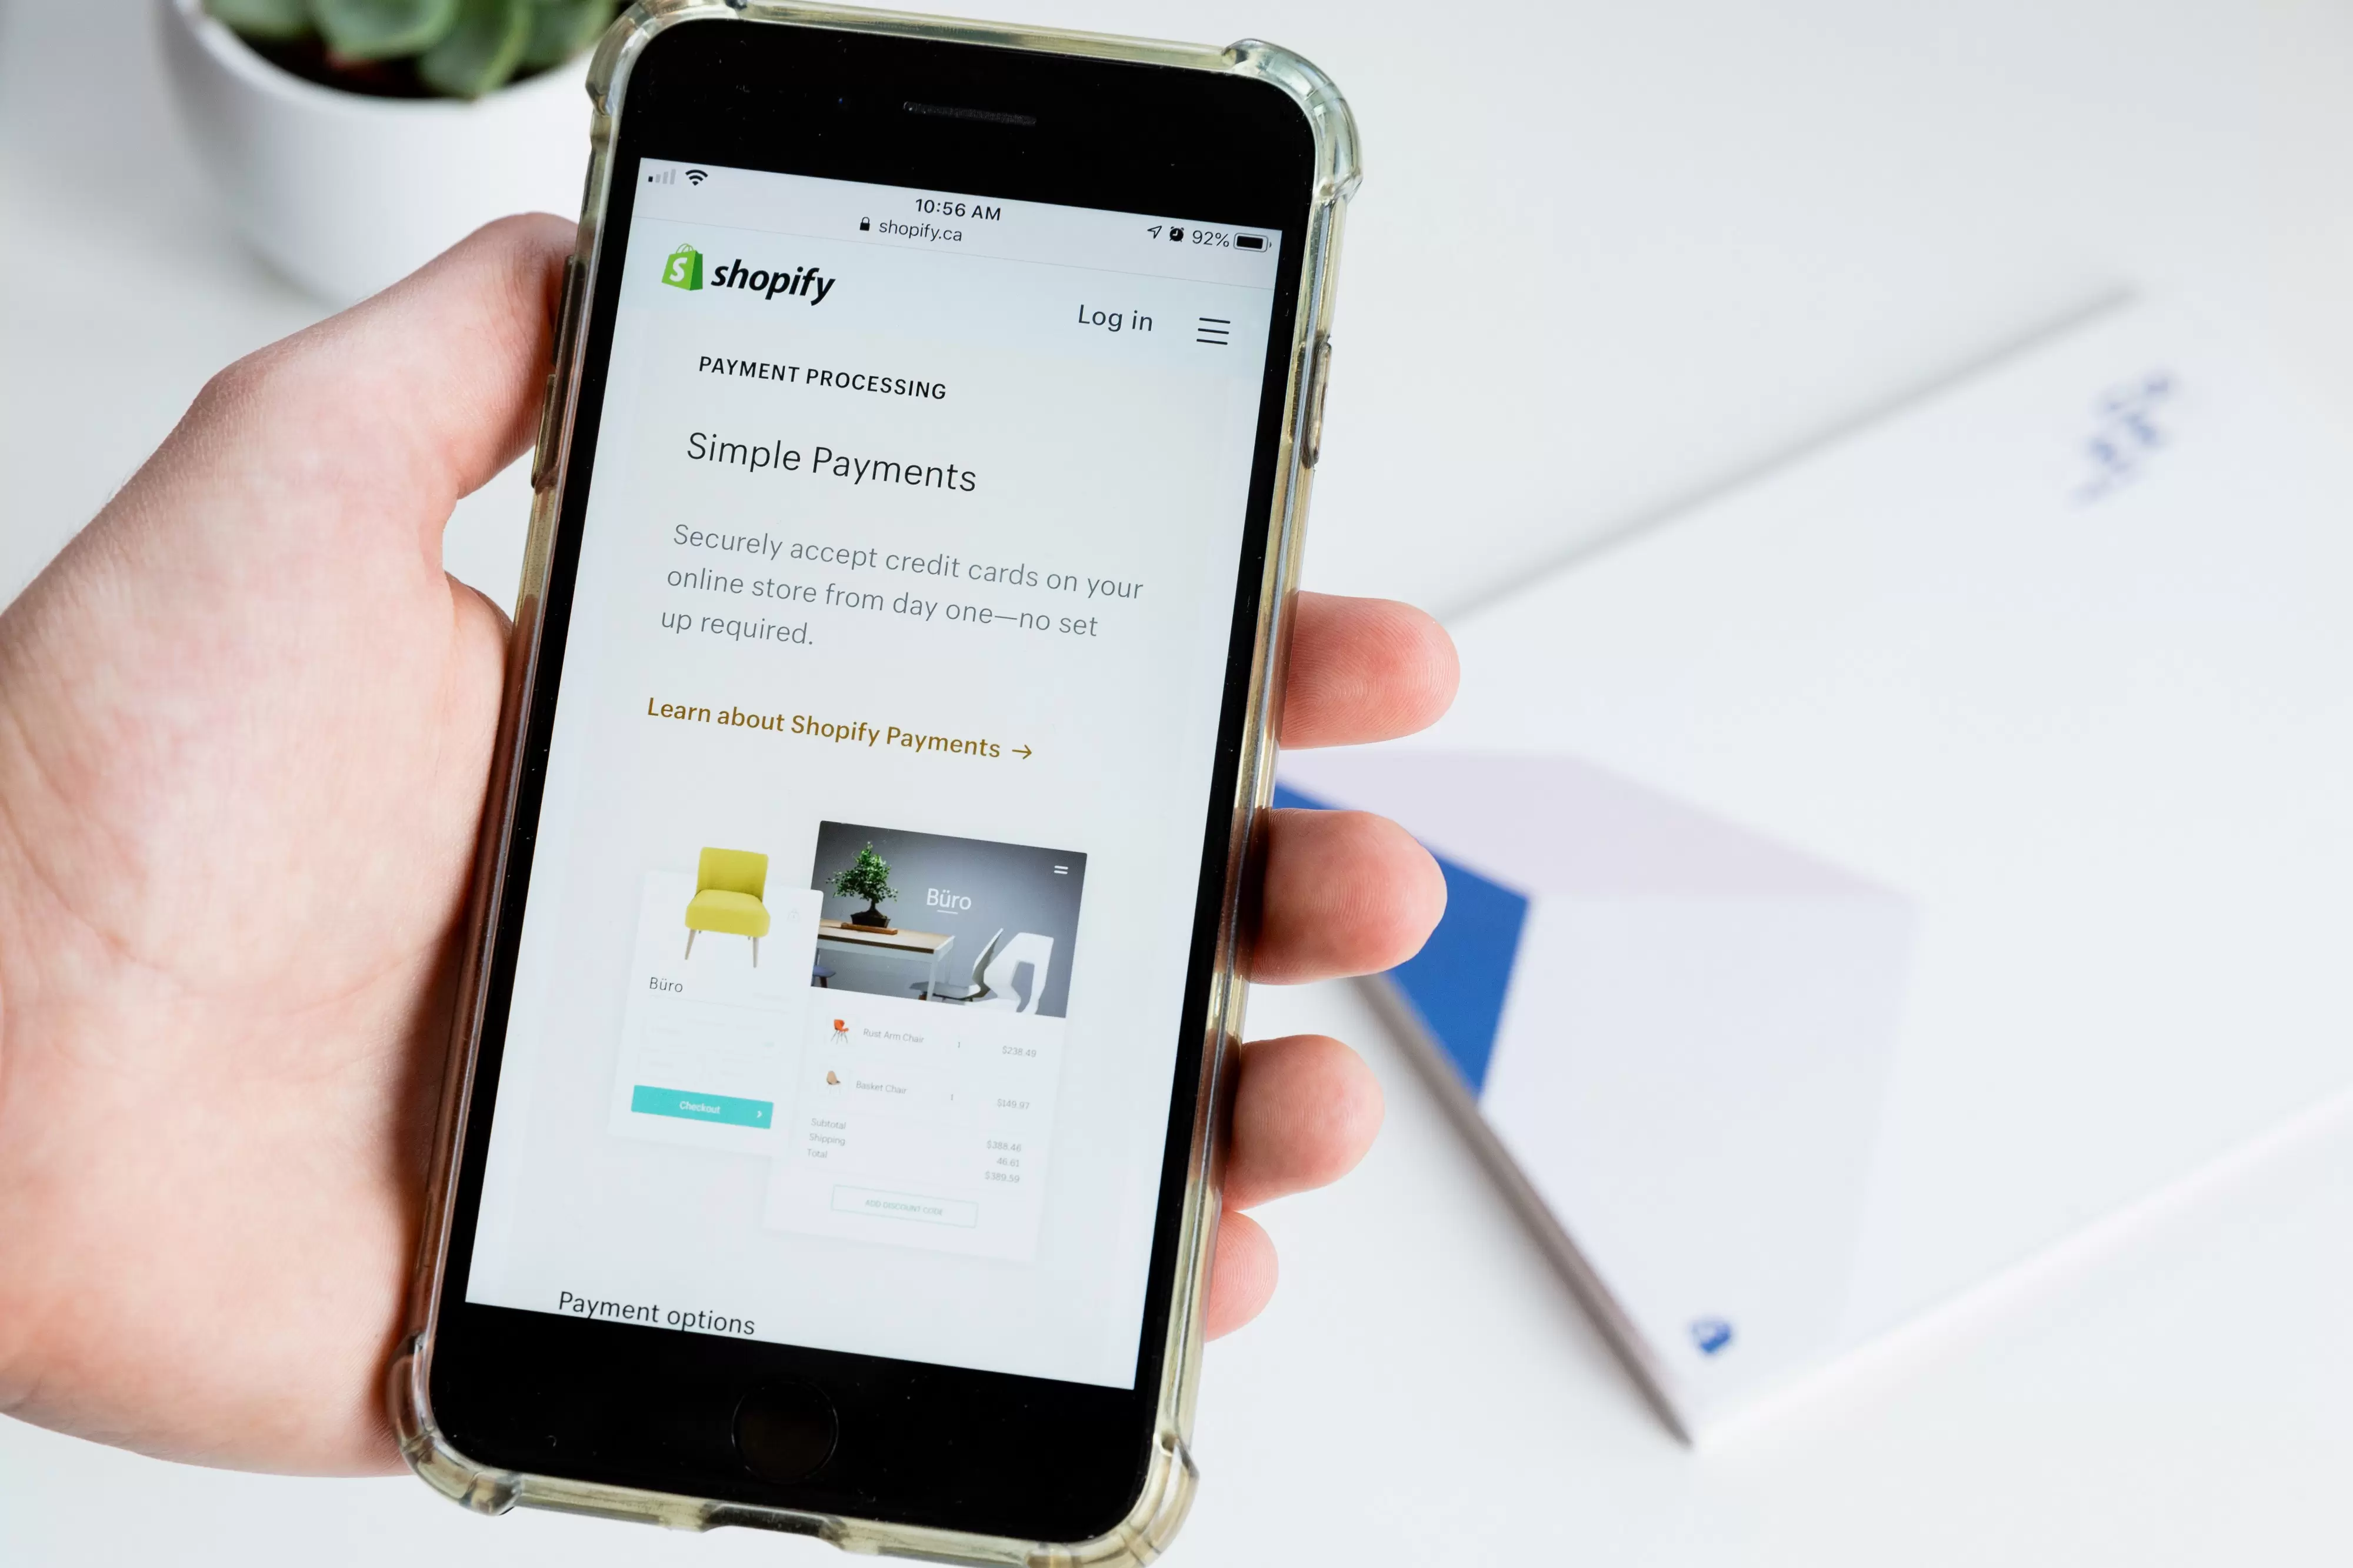 What Is & How Does Shopify Work?